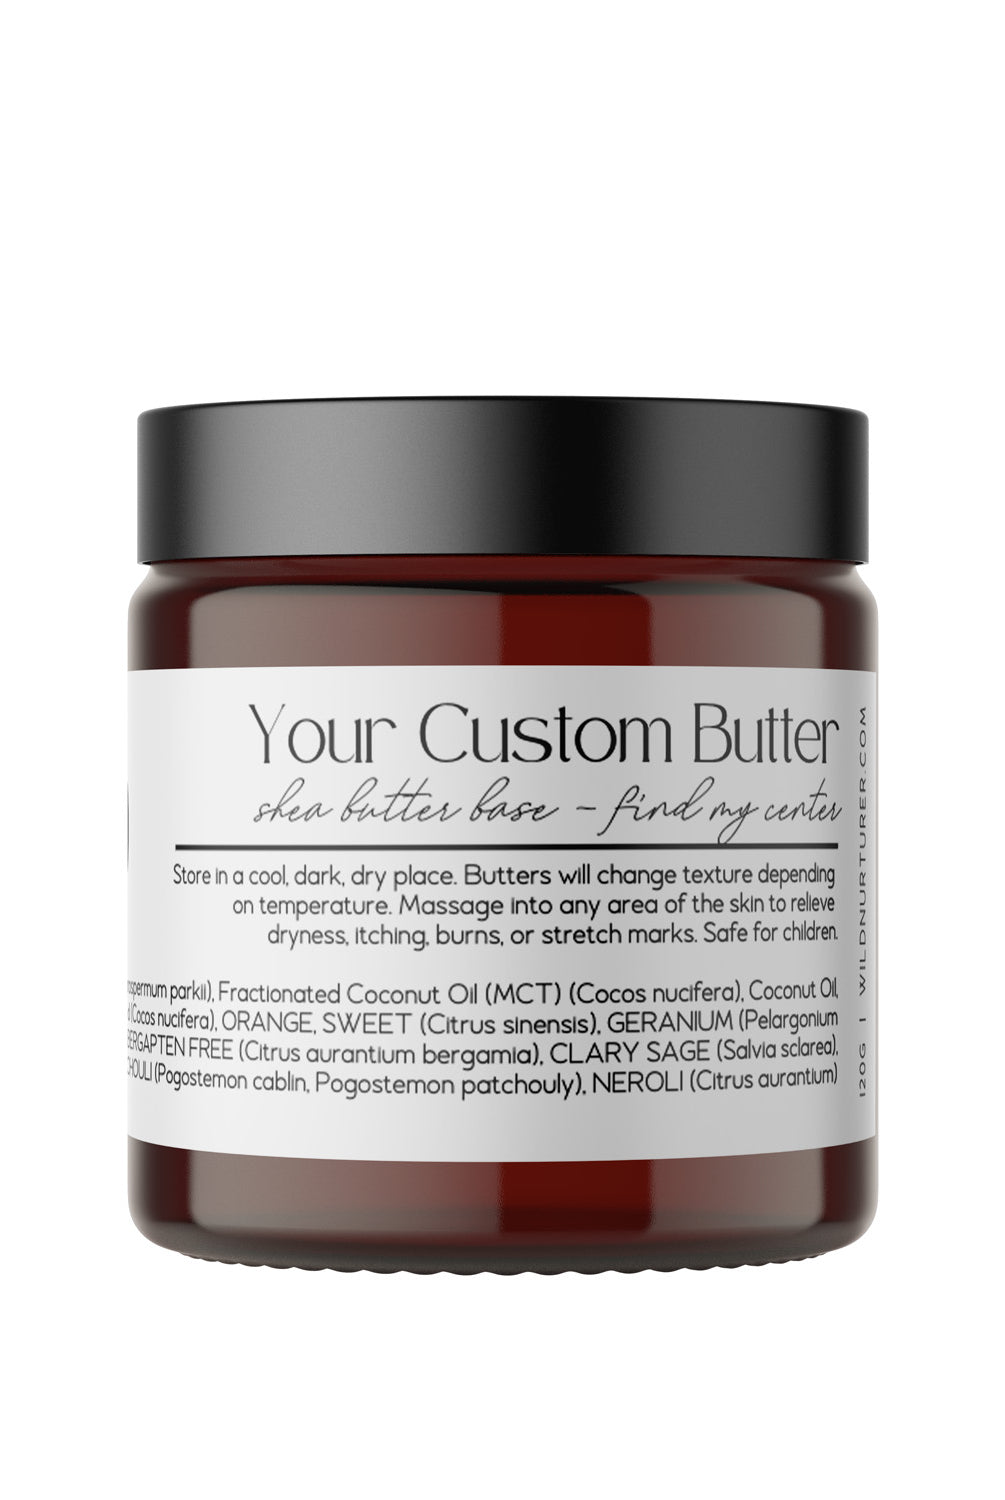 A red jar of Wild Nurturer Aromatherapy Customizable Body Butter - 4oz Size with product details on the label, displayed against a white background.